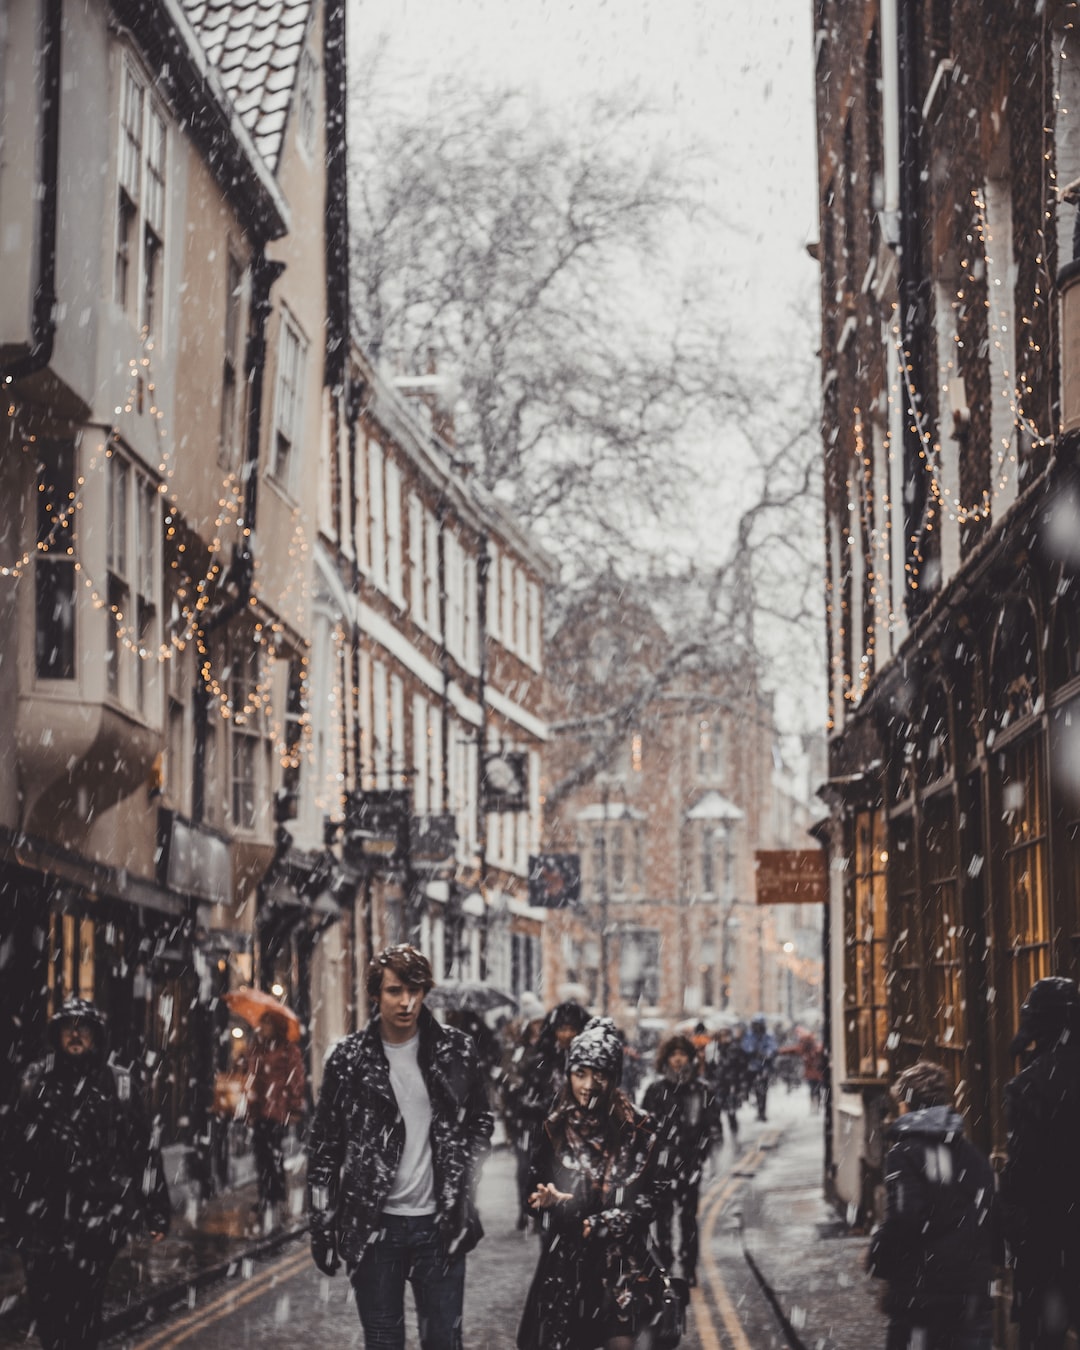 Its quite rare that we see snow in England before Christmas. It really brings our old towns to life and gives such a great atmosphere.